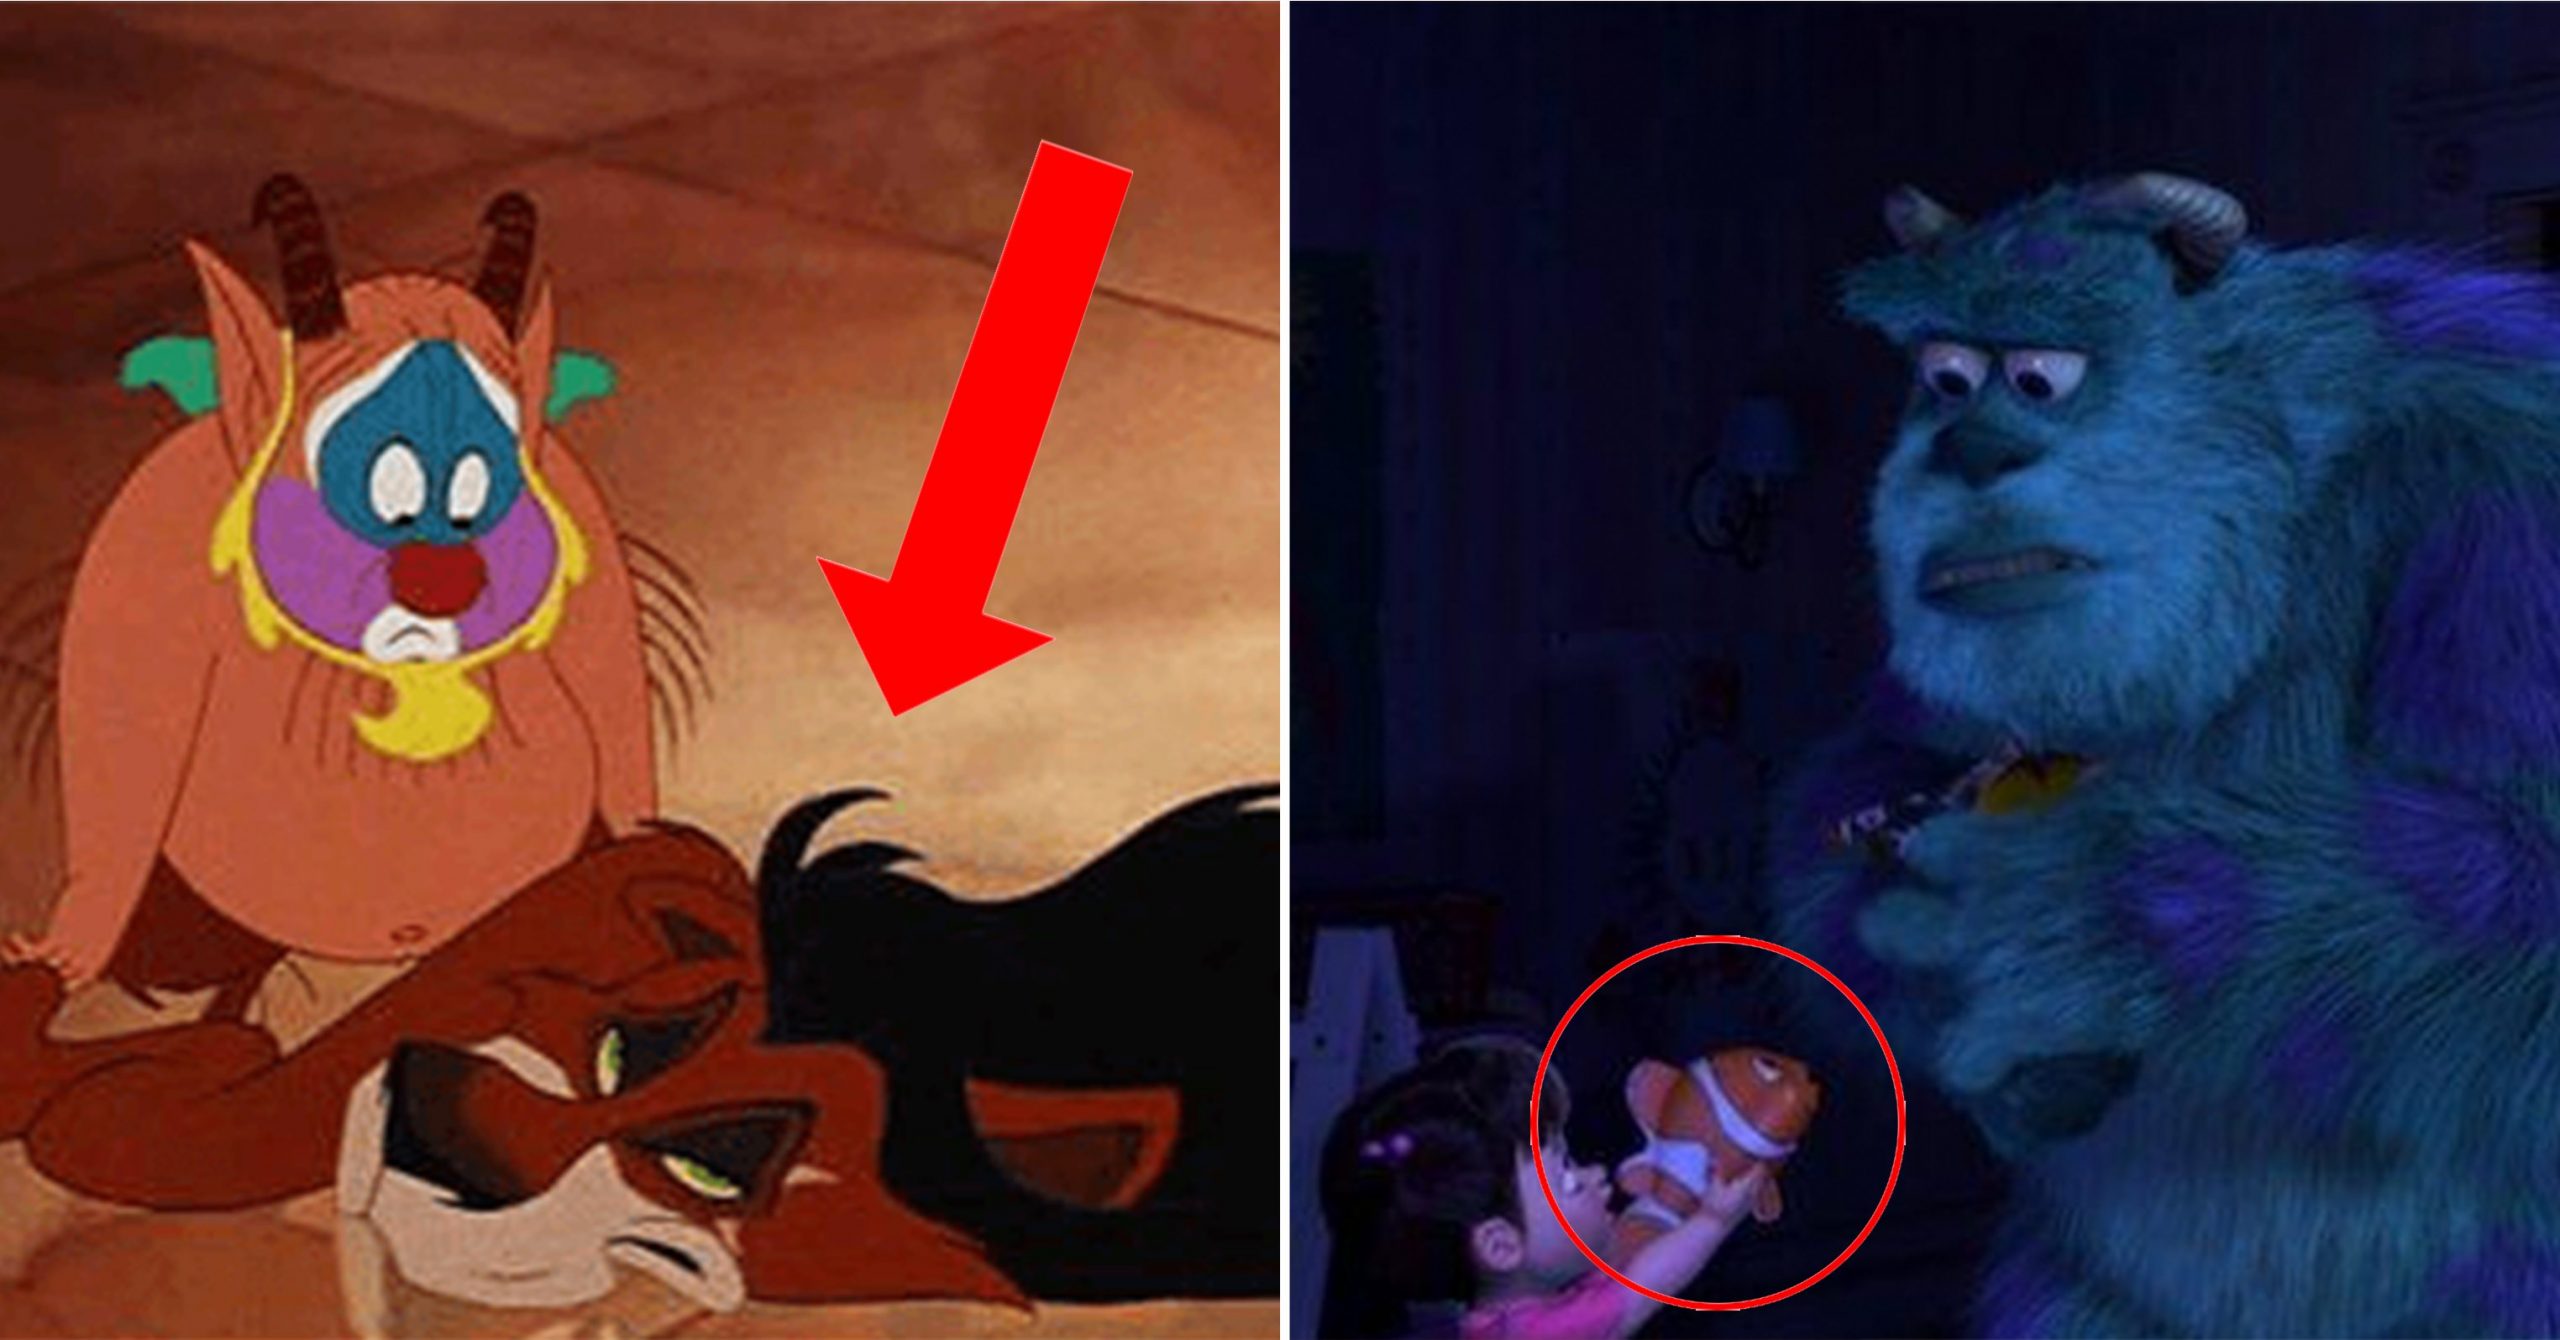 50 Disney Scenes Containing Hidden Characters From Other Disney Movies 2166